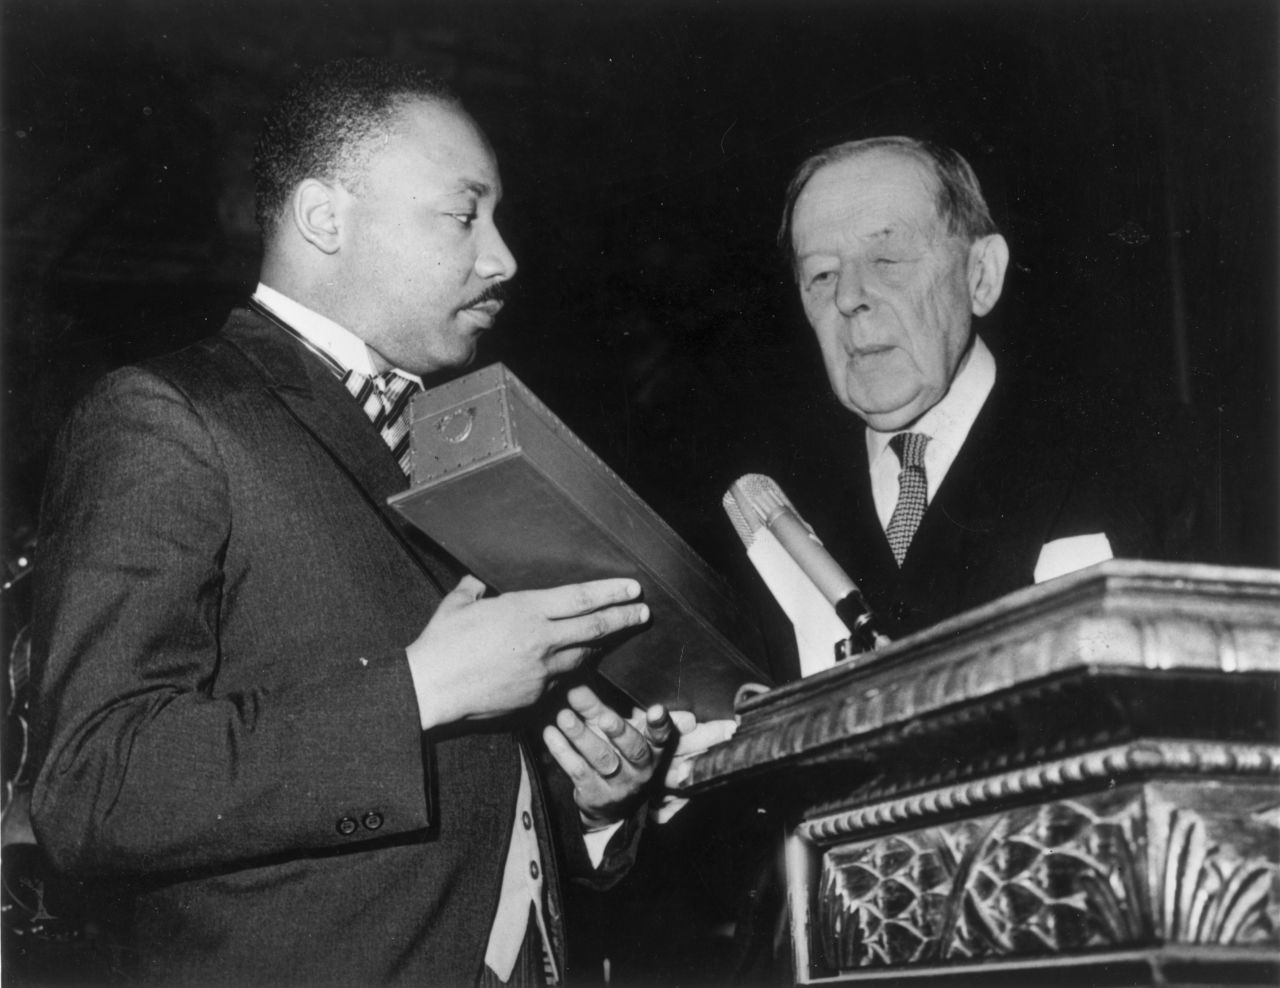 Martin Luther King Jr. was given the prize for his efforts to further the U.S. civil rights movement.